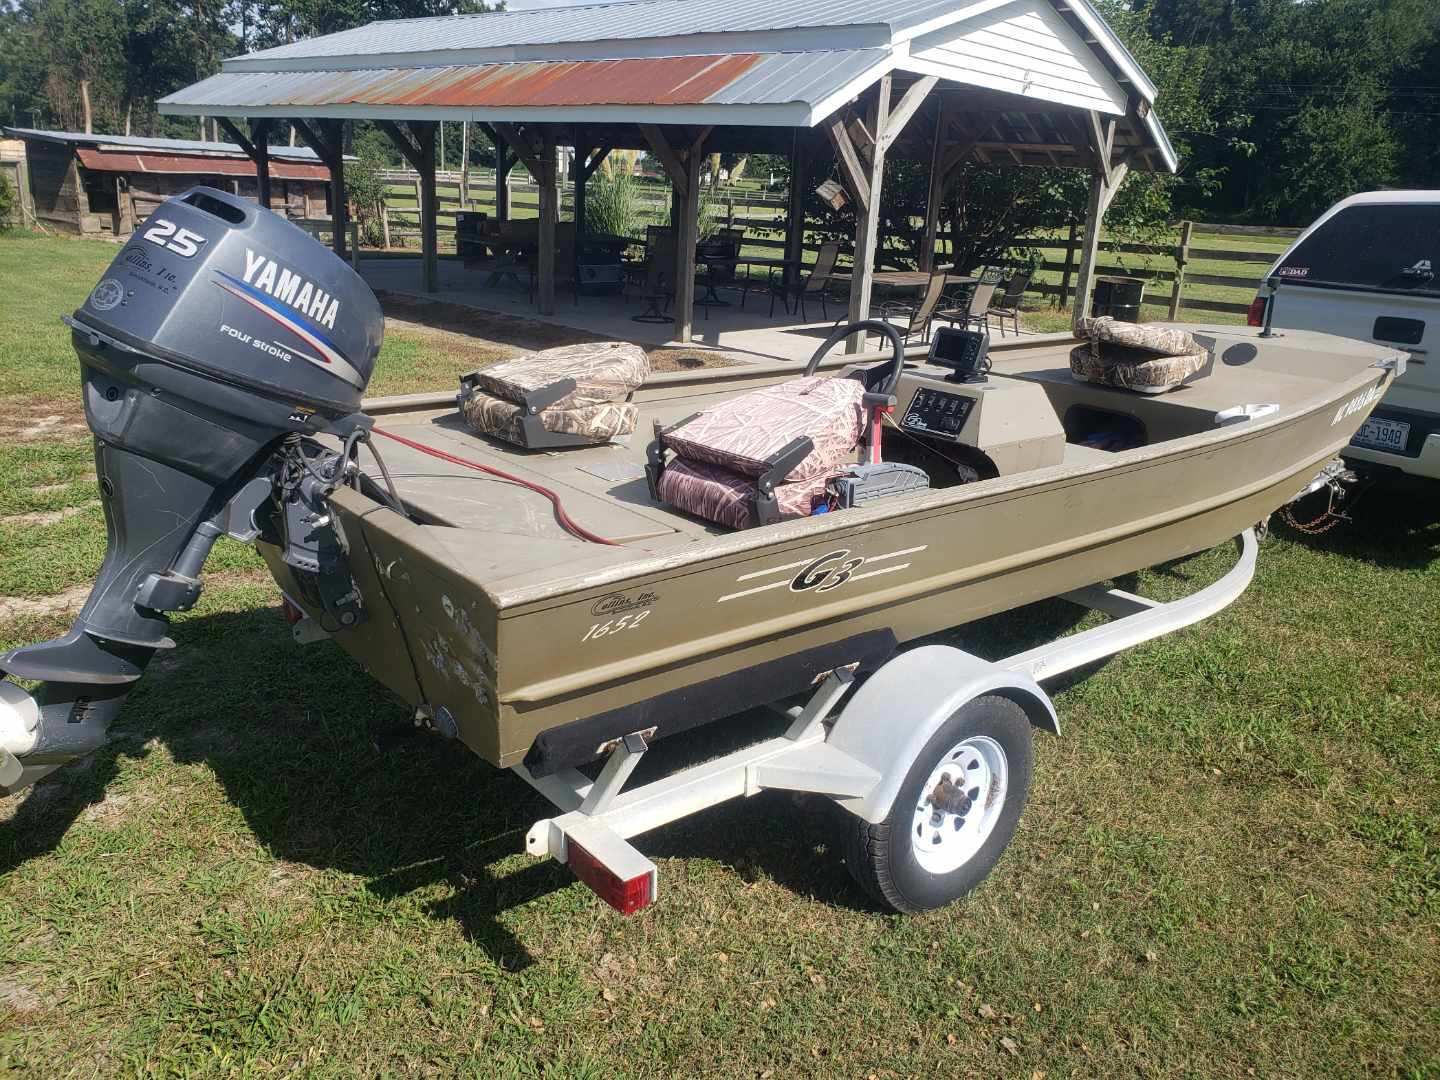 G3 1966 cc - The Hull Truth - Boating and Fishing Forum